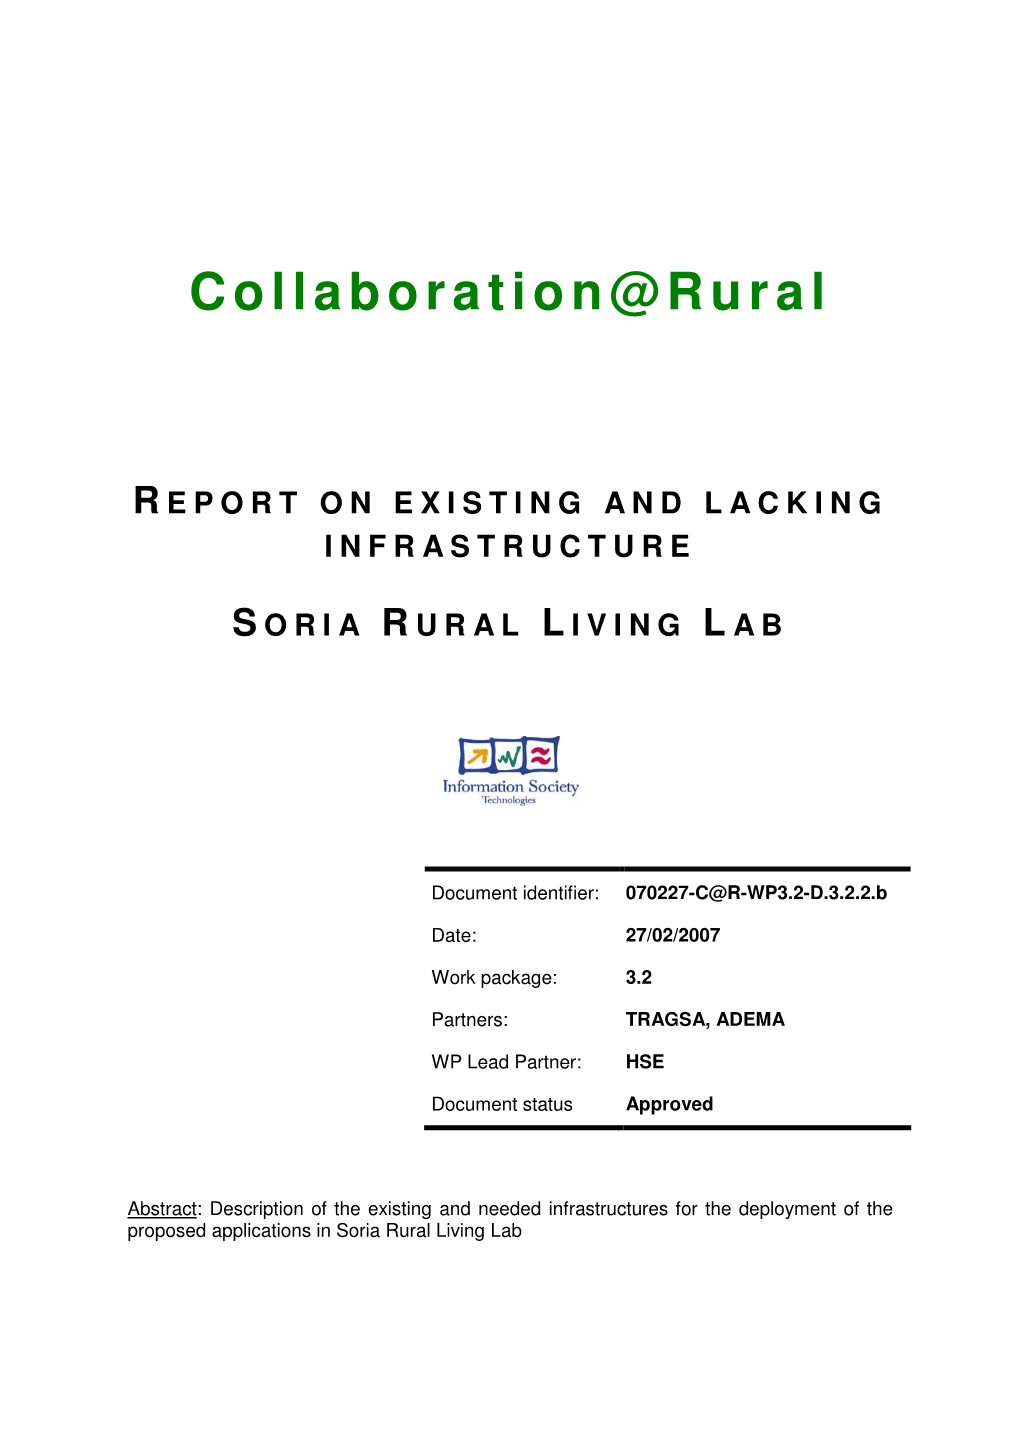 Collaboration@Rural REPORT on EXISTING and LACKING